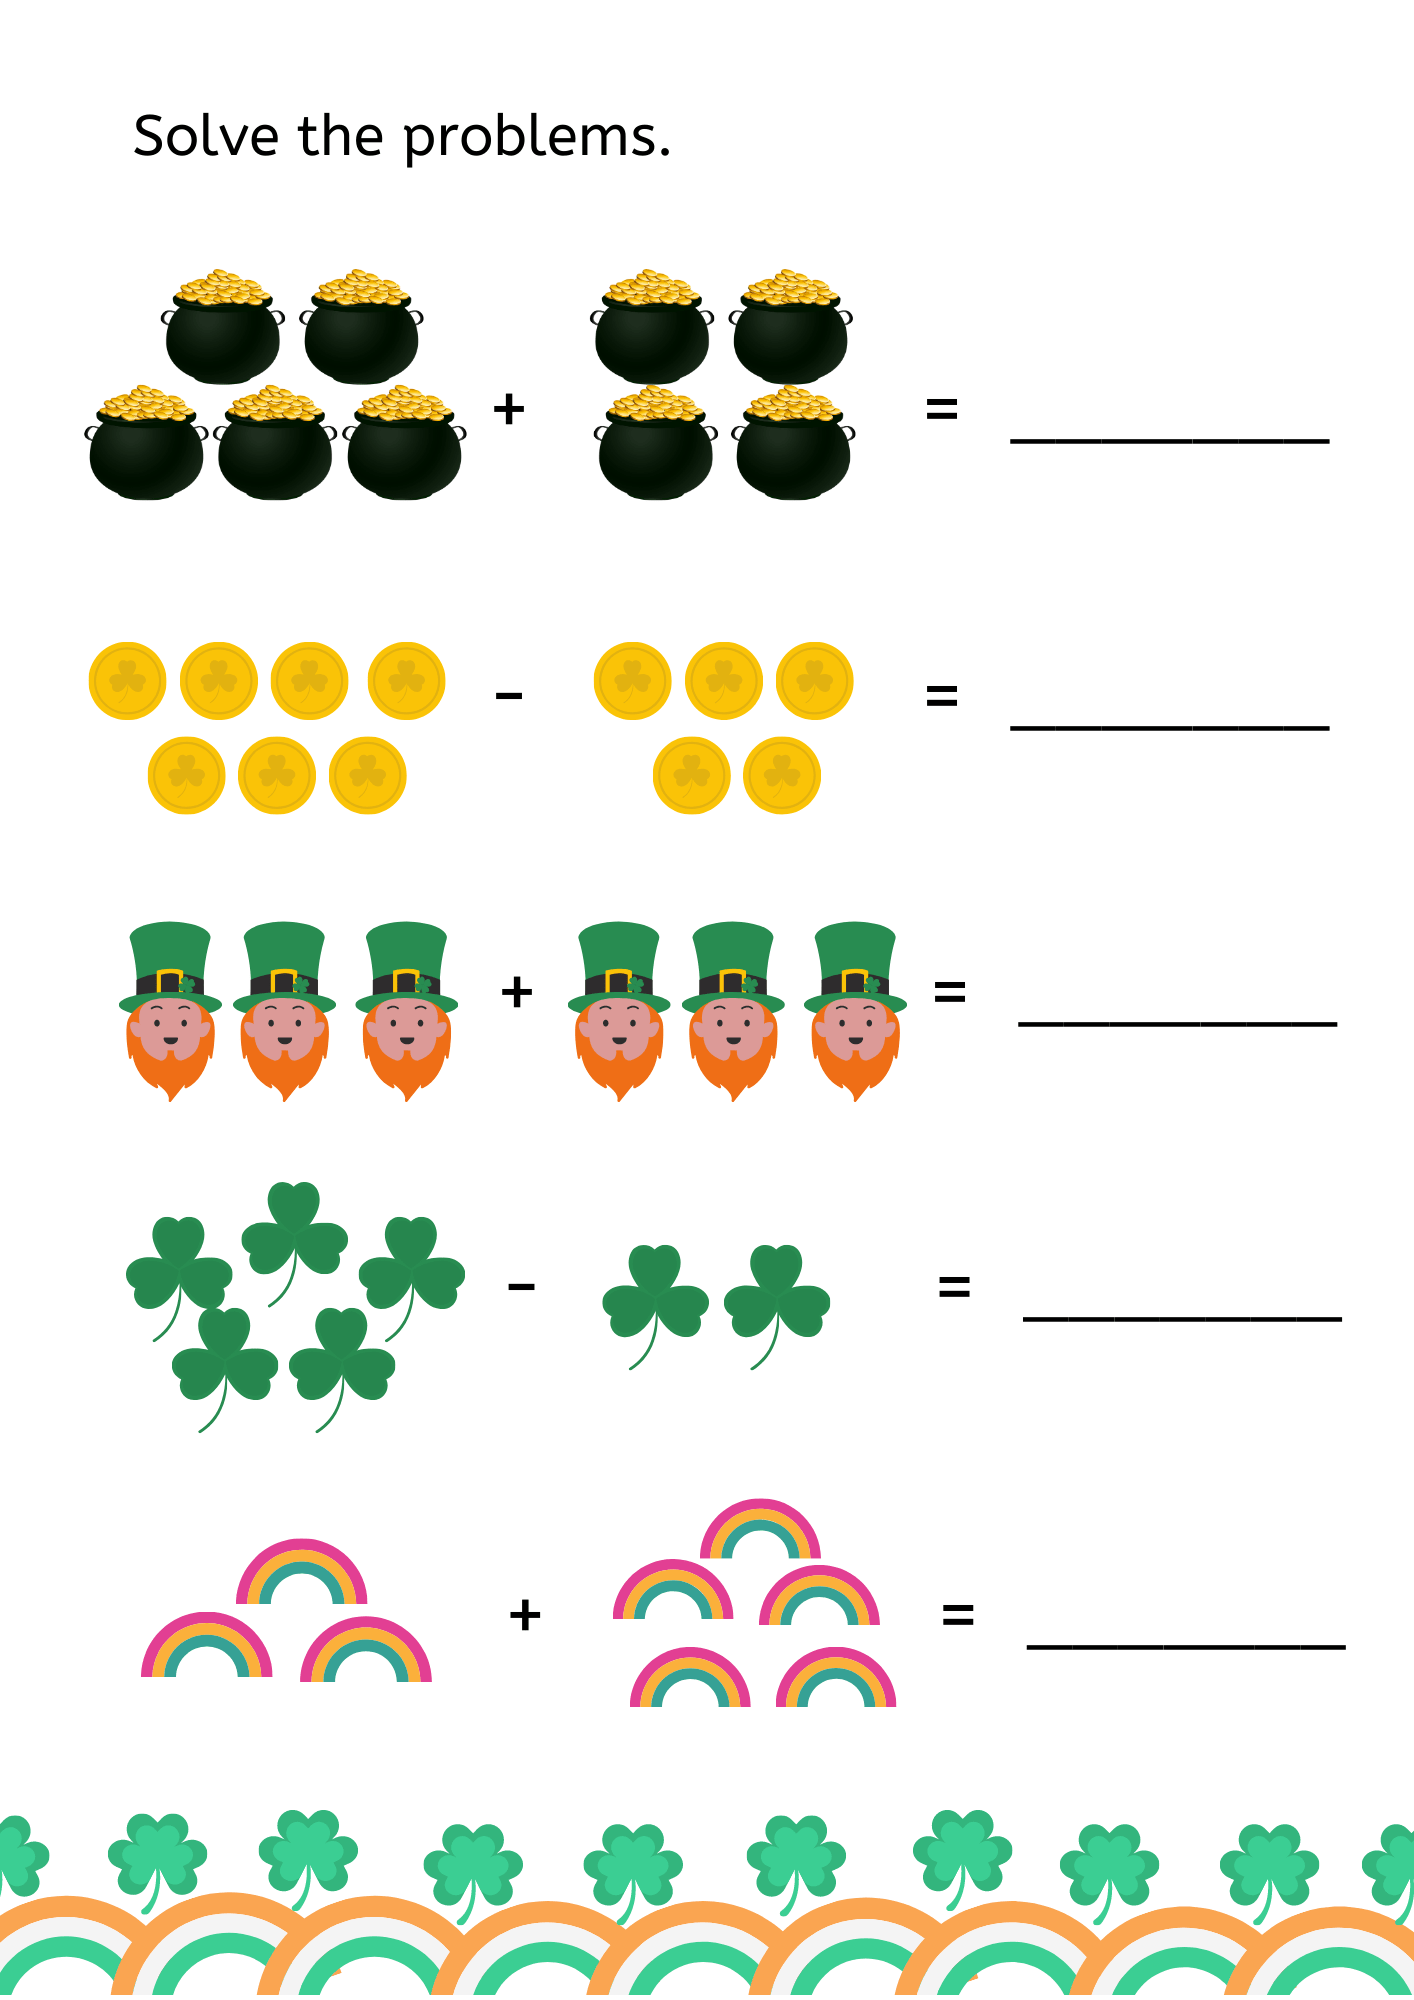 st-patrick-s-day-activities-st-patrick-s-day-worksheets